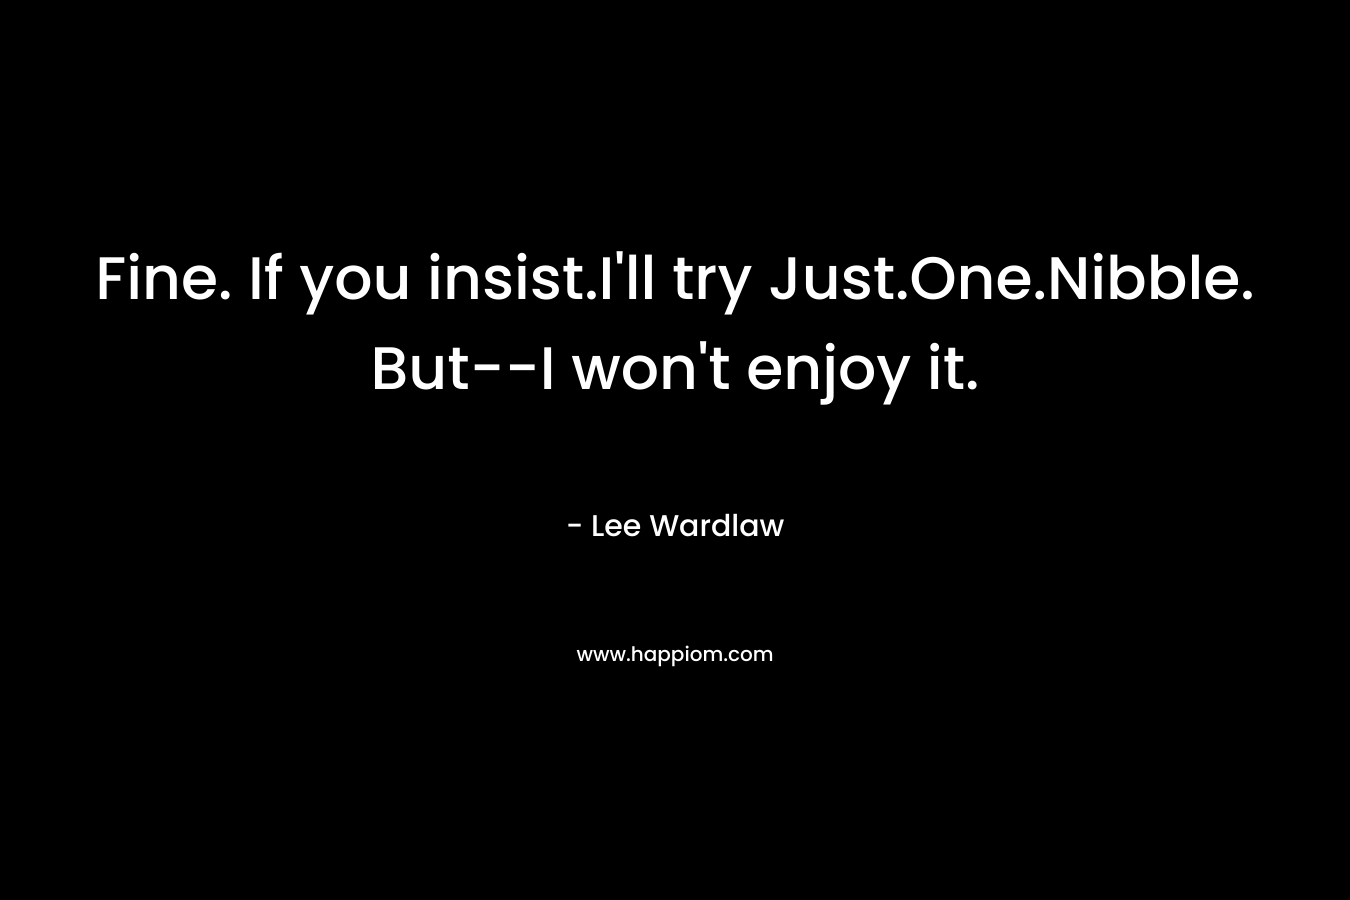 Fine. If you insist.I’ll try Just.One.Nibble. But–I won’t enjoy it. – Lee Wardlaw